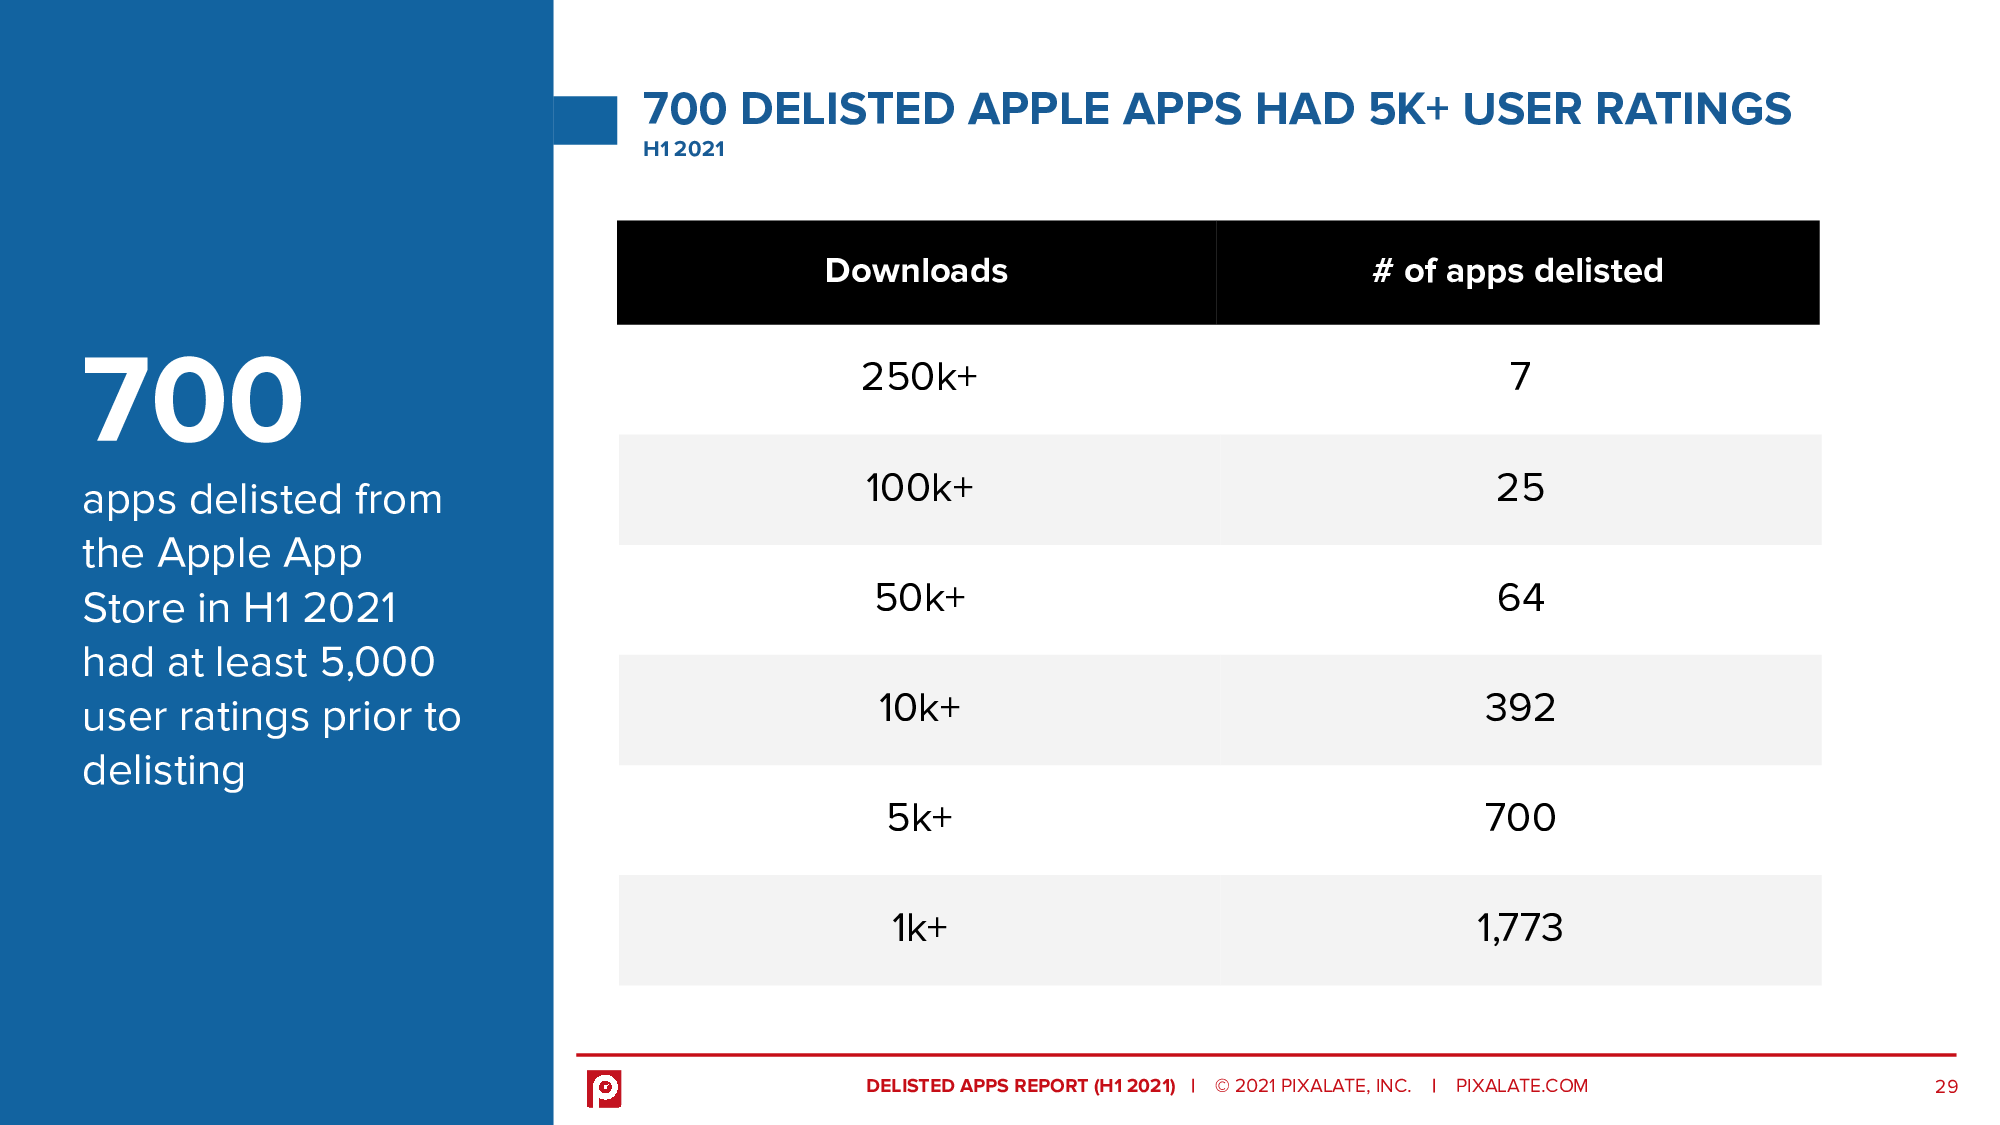 700 apps delisted from the Apple App Store in H1 2021 had at least 5,000 user ratings prior to delisting